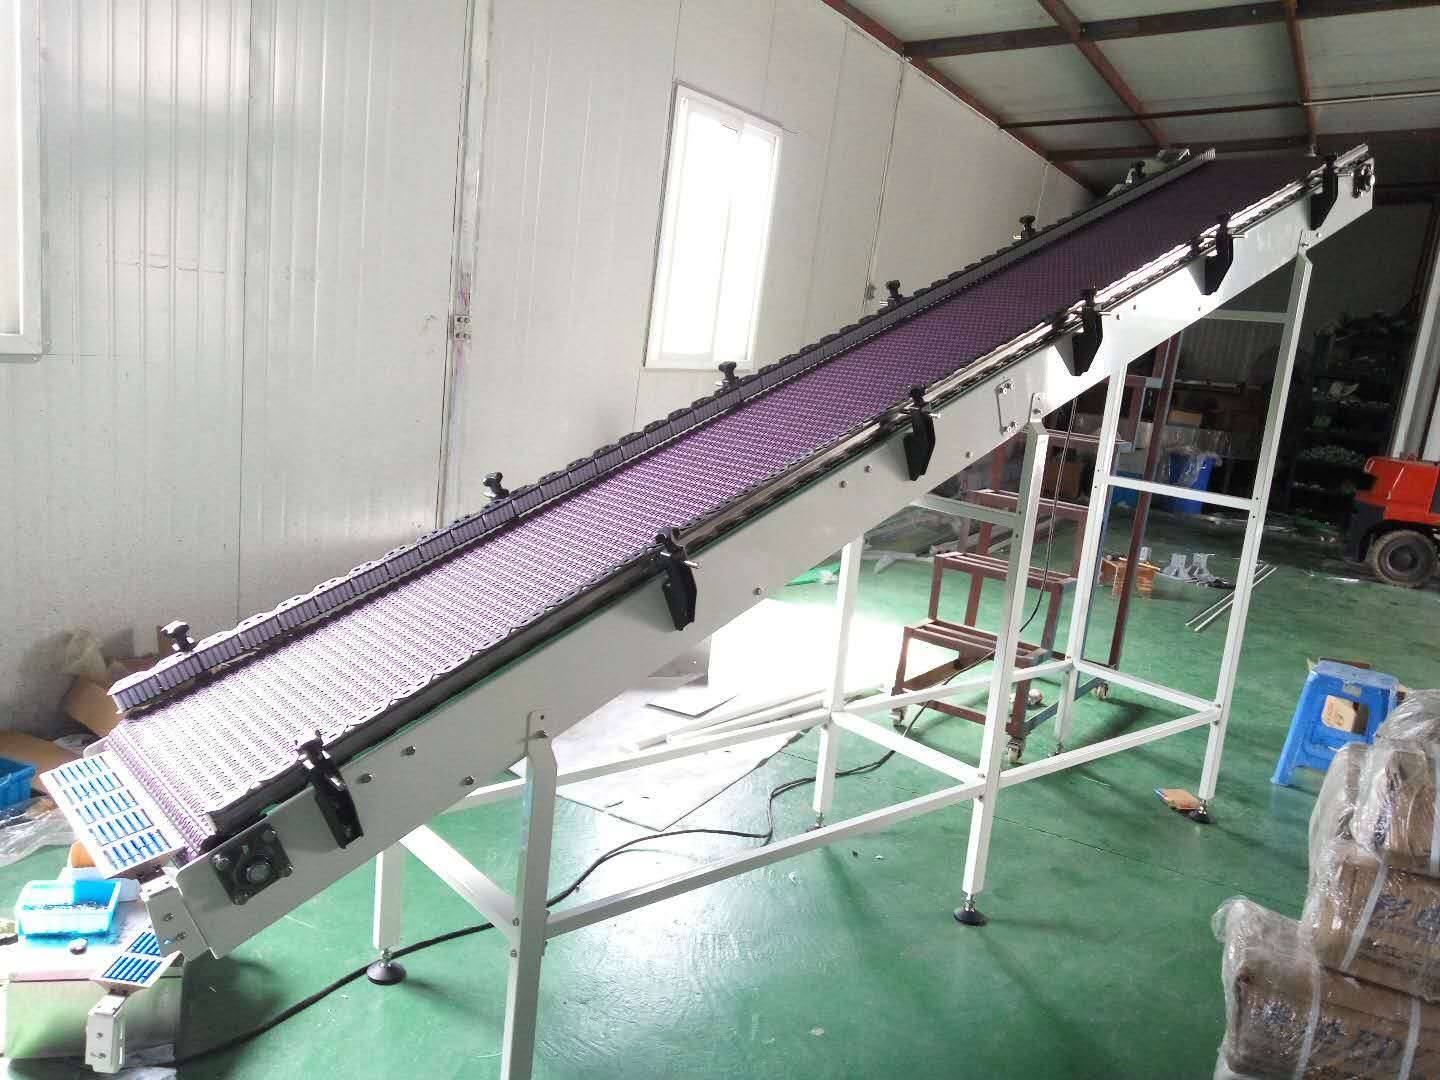 Hairise Inclined Modular Belt Conveyor with Rubber